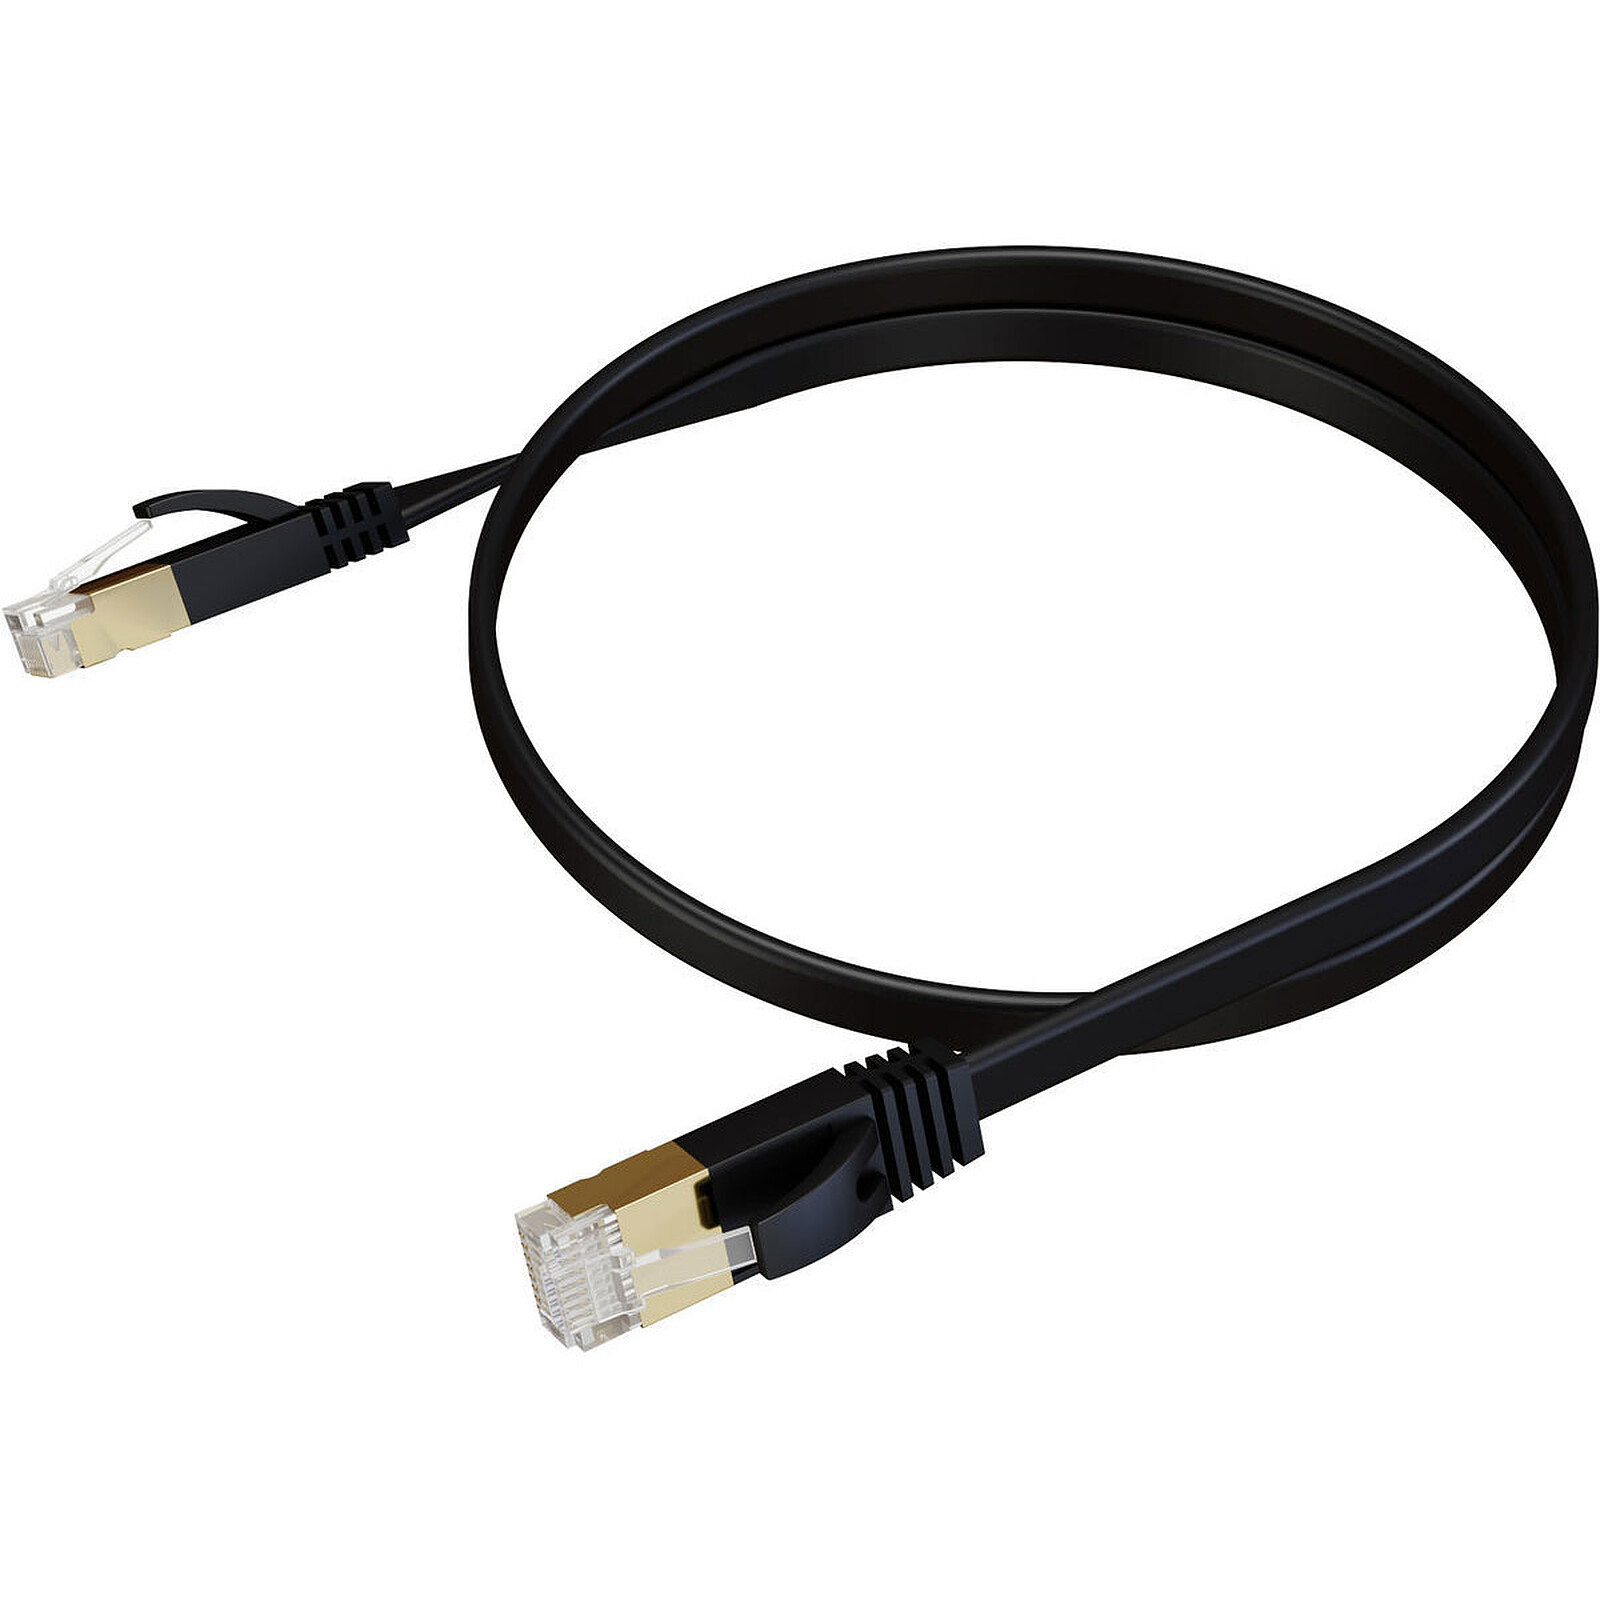 Cable real E-NET 600-2 (5 m) - Cable RJ45 - LDLC